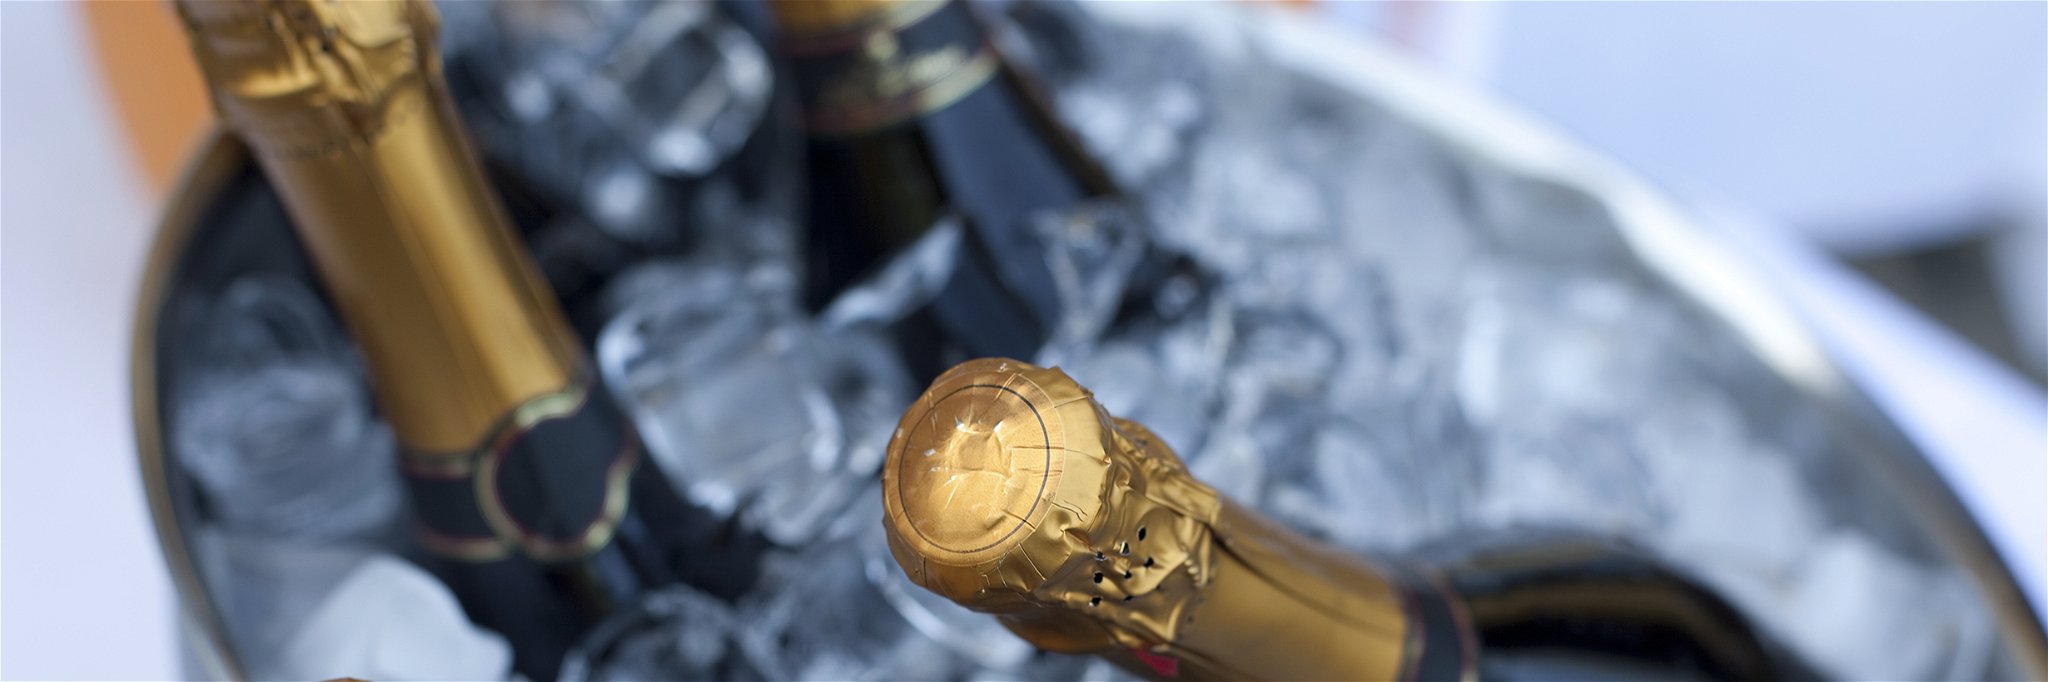 Champagne: the outlook for 2023 is cautious.